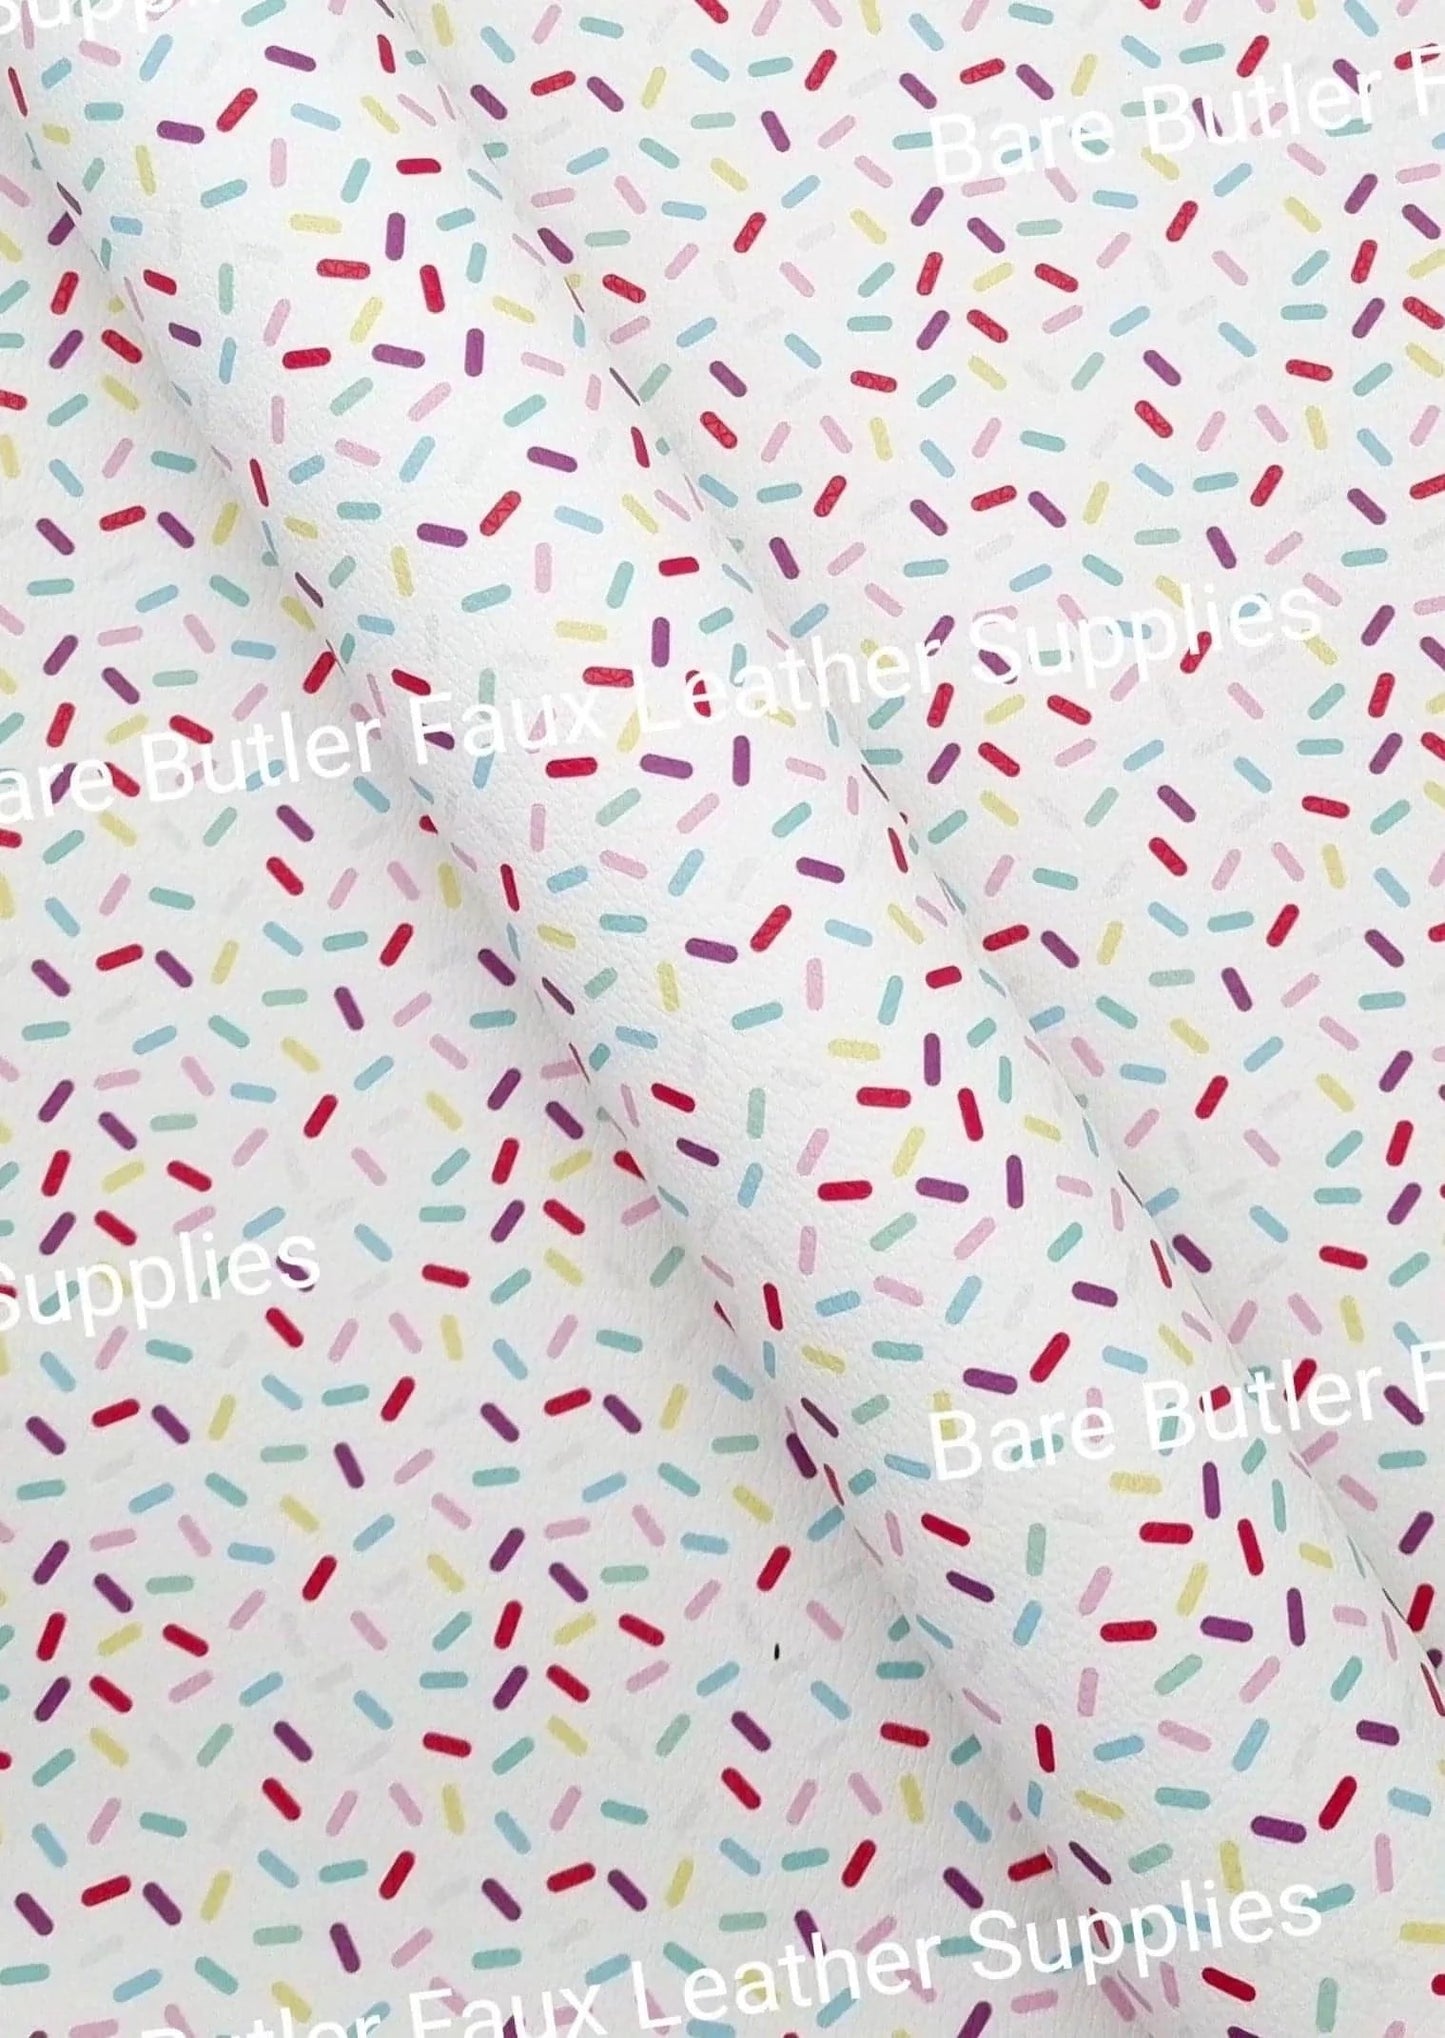 Sprinkles White Litchi - Faux, Faux Leather, ice cream, Leather, leatherette, Litchi, sprinkles - Bare Butler Faux Leather Supplies 